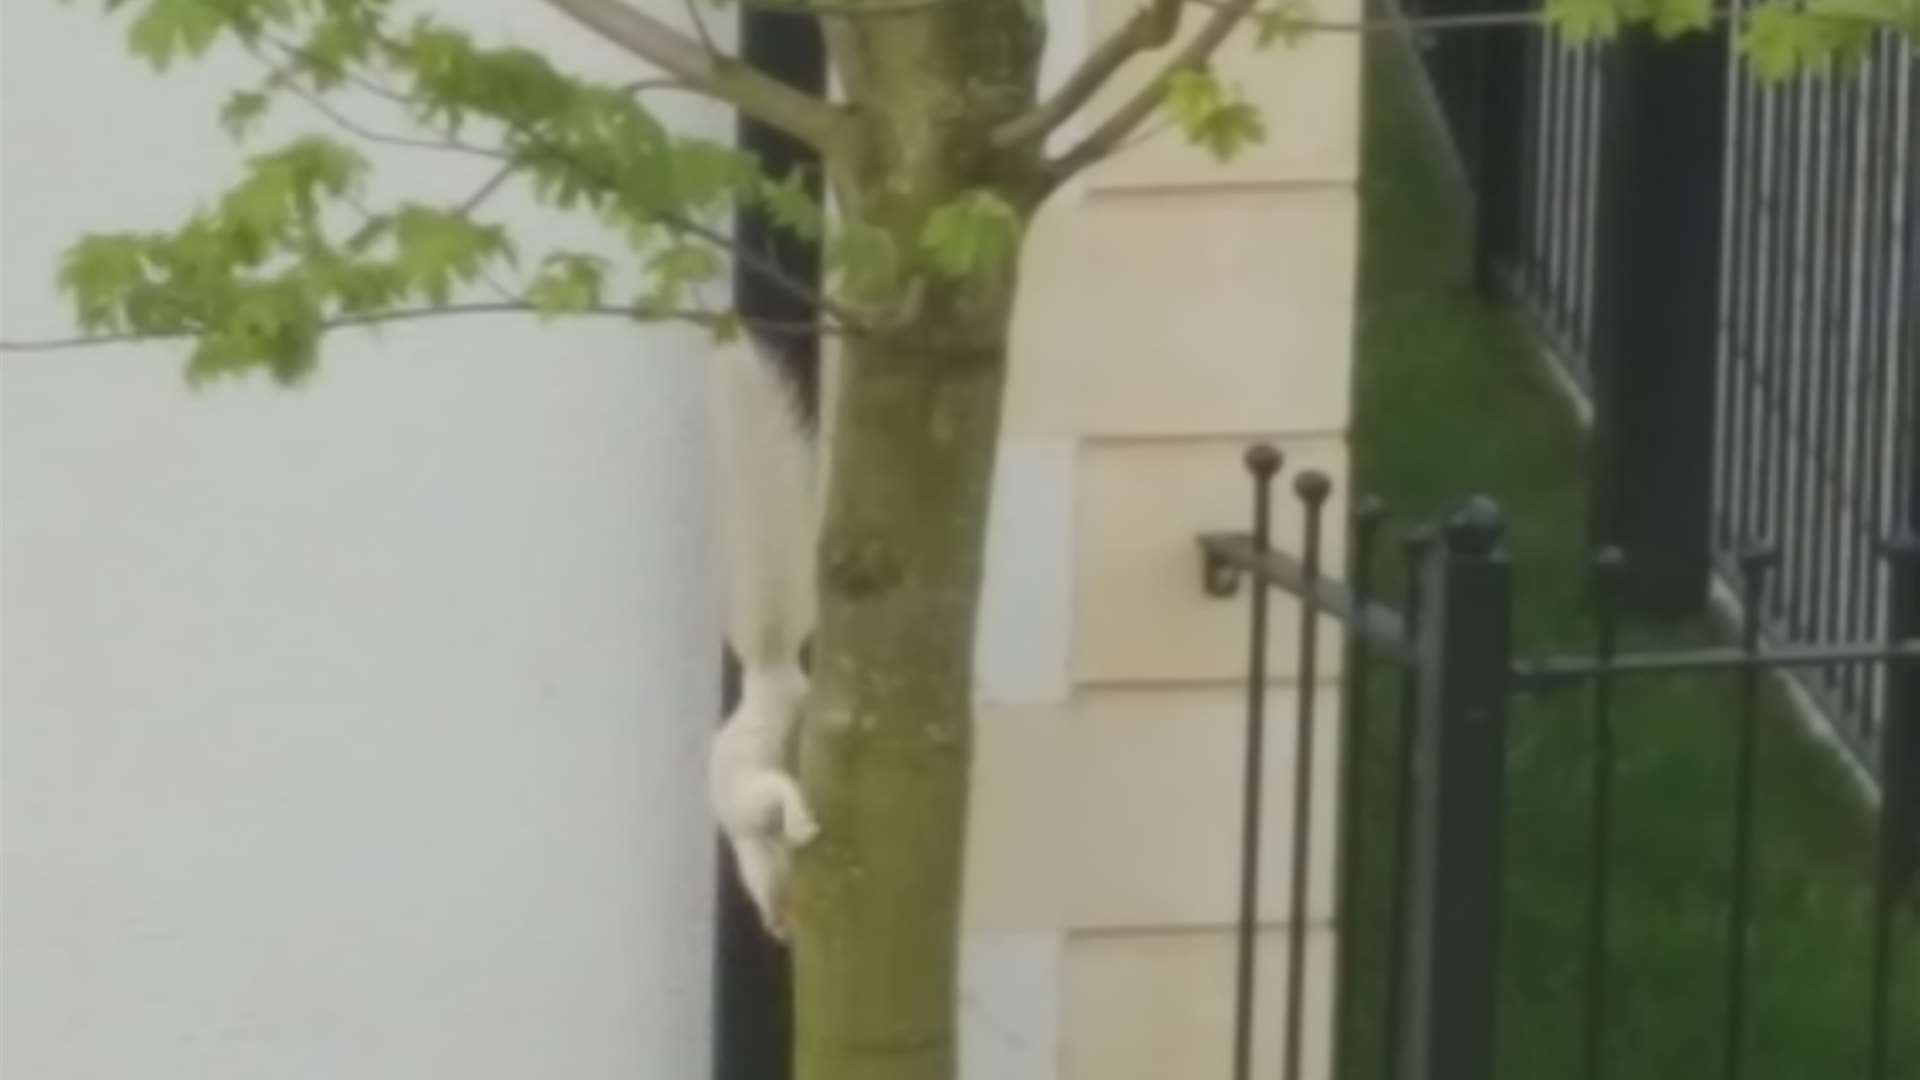 The apparently albino squirrel scuttles down a tree